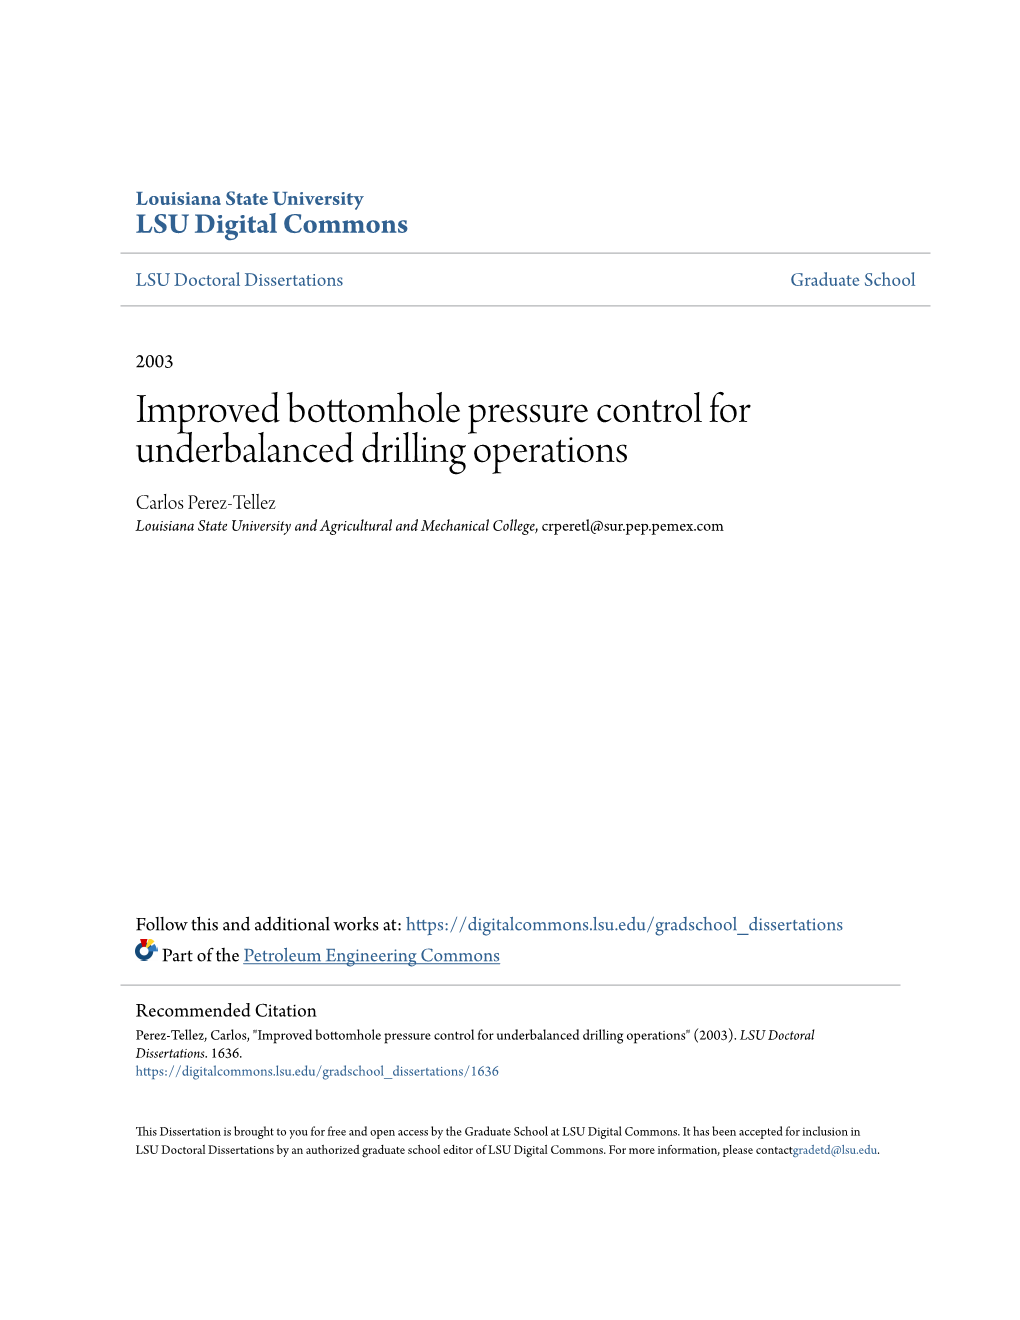 Improved Bottomhole Pressure Control for Underbalanced Drilling Operations